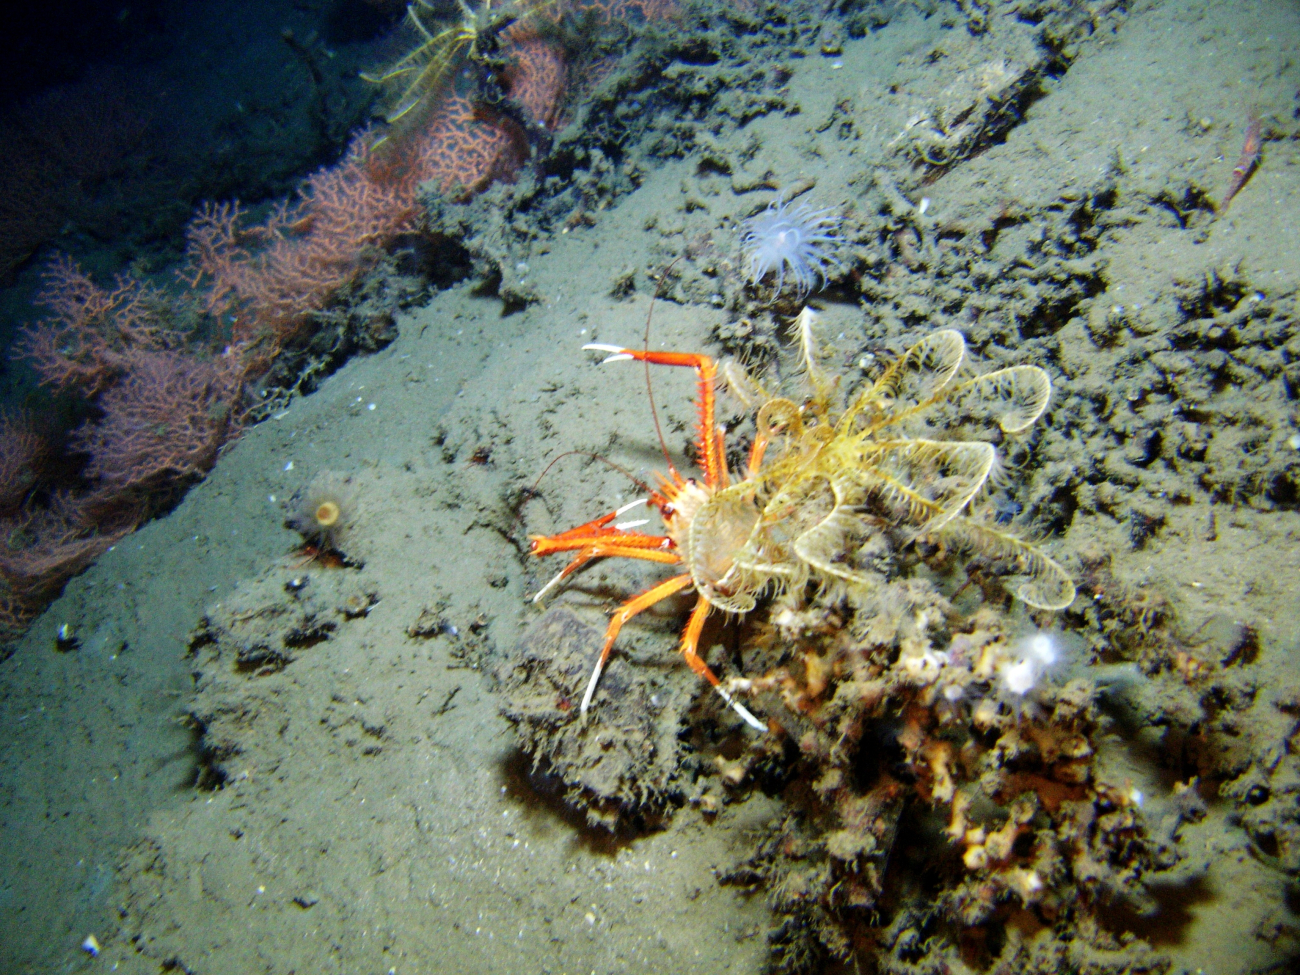 A large yellow and orange feather star crinoid atop a local topographic high,a large squat lobster, a small white anemone, a cup coral, a red soldier shrimp, and red coral bushes